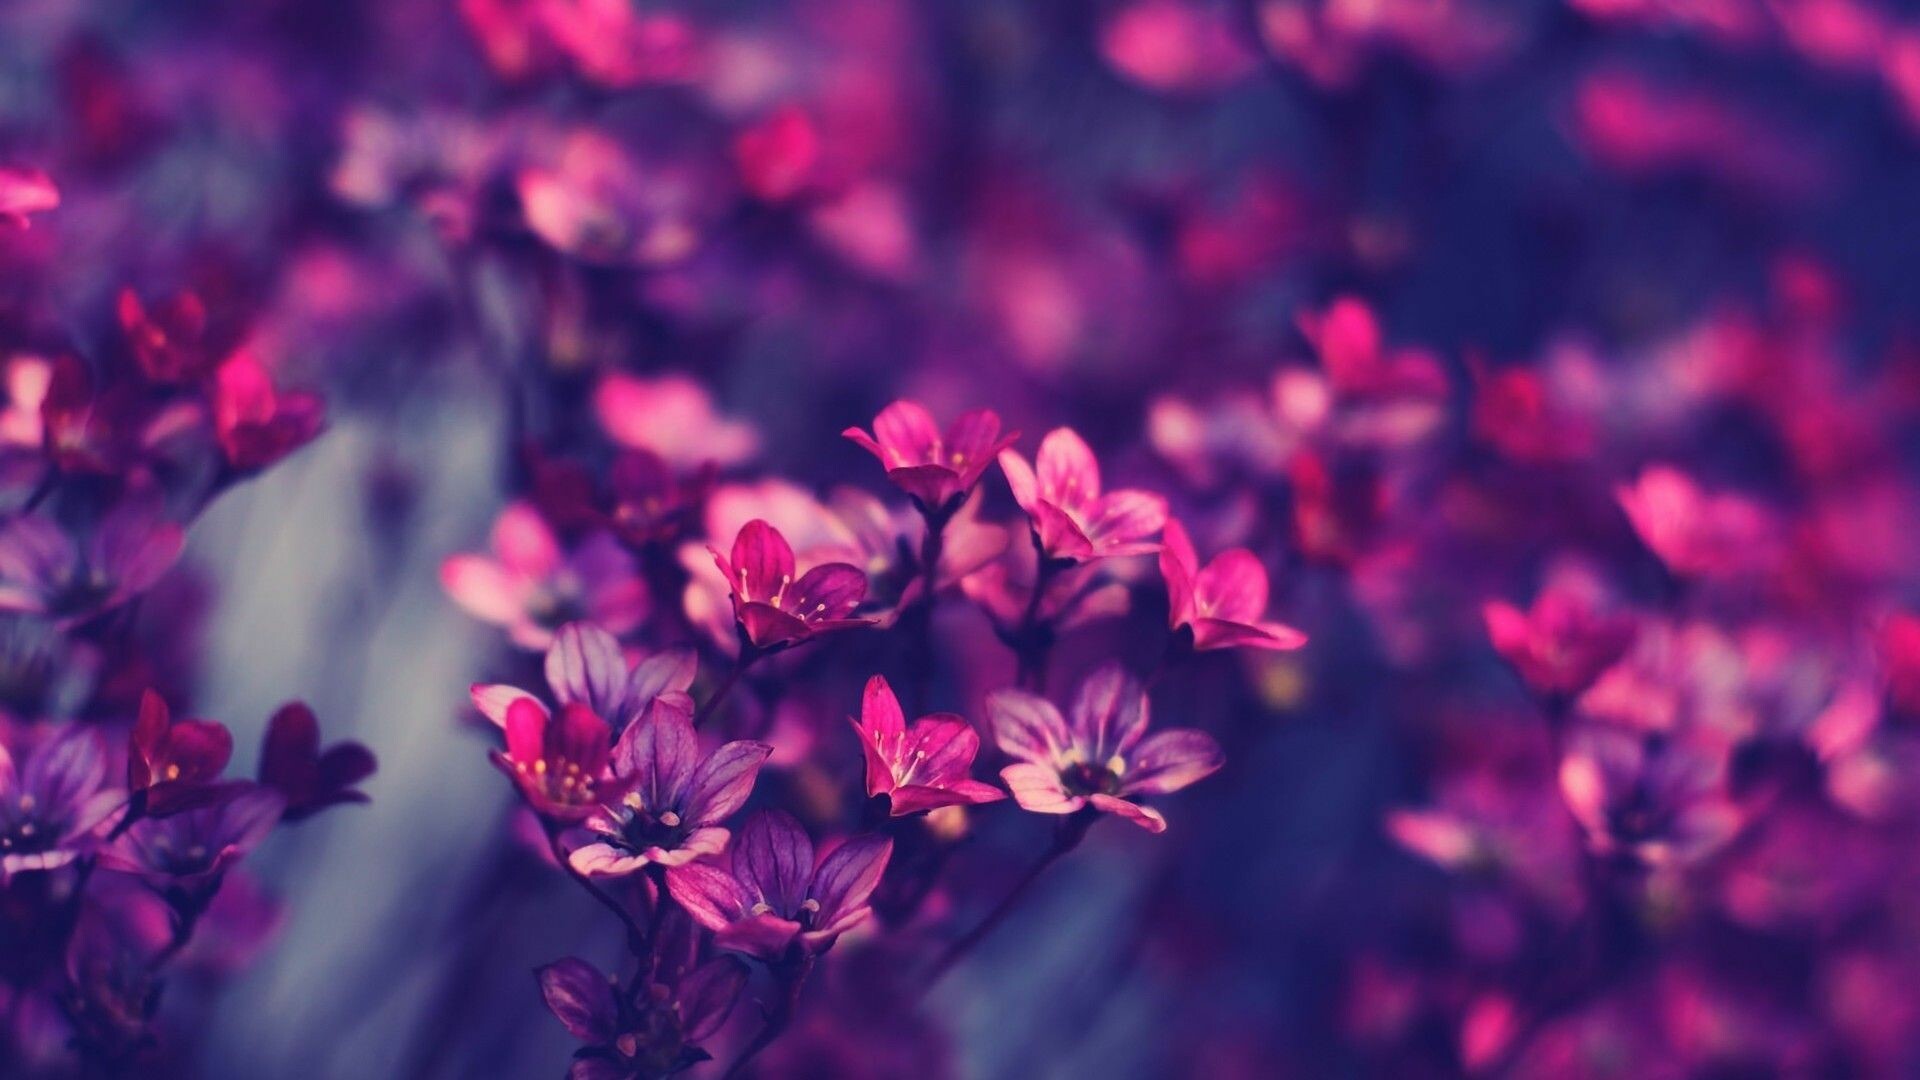 37+ Floral Desktop Wallpapers: HD, 4K, 5K for PC and Mobile | Download free  images for iPhone, Android